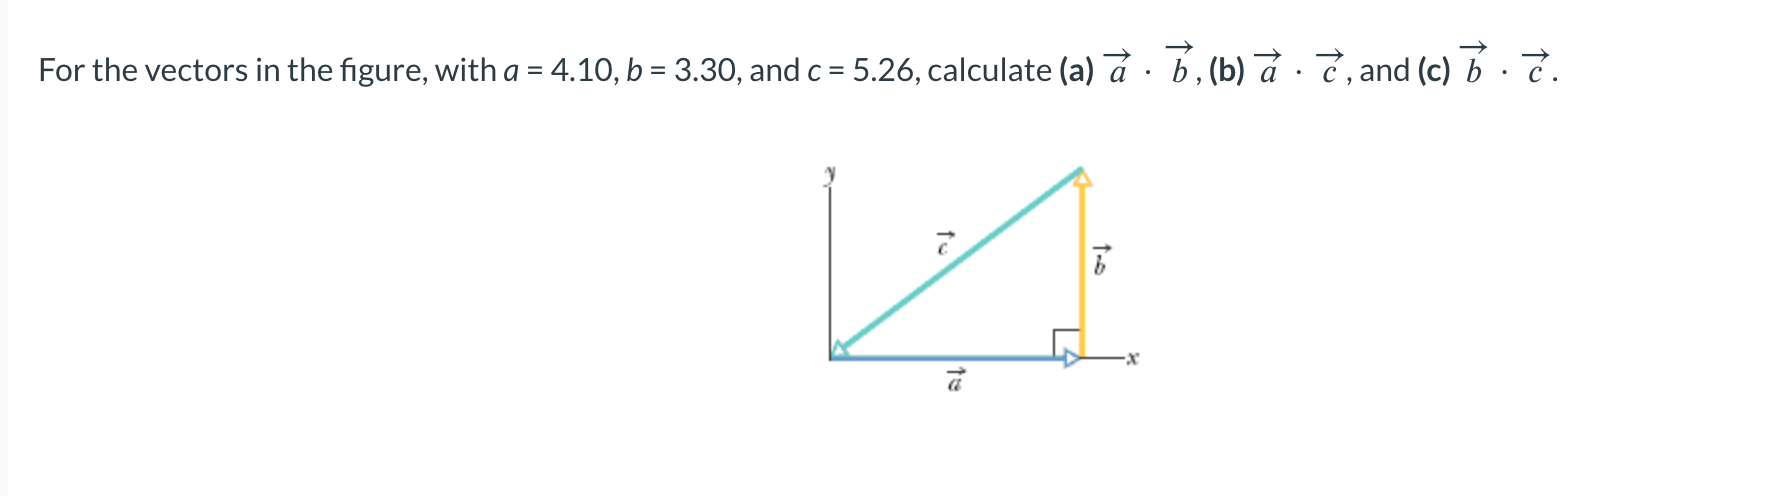 For the vectors in the figure, with a = 4.10, b = 3.30, and c = 5.26, calculate (a)   7, (b)   7, and (c) 7 